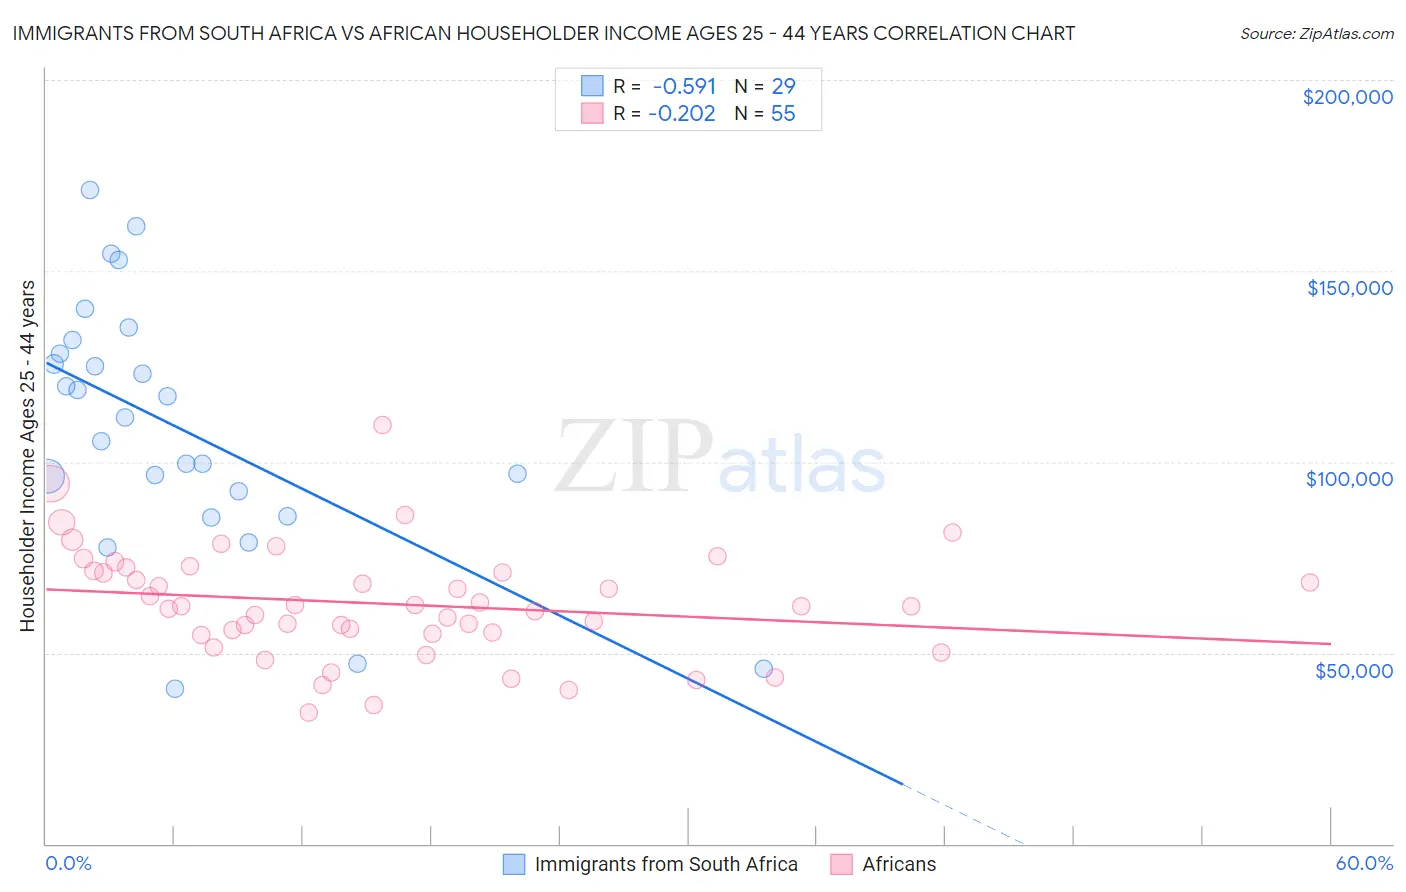 Immigrants from South Africa vs African Householder Income Ages 25 - 44 years